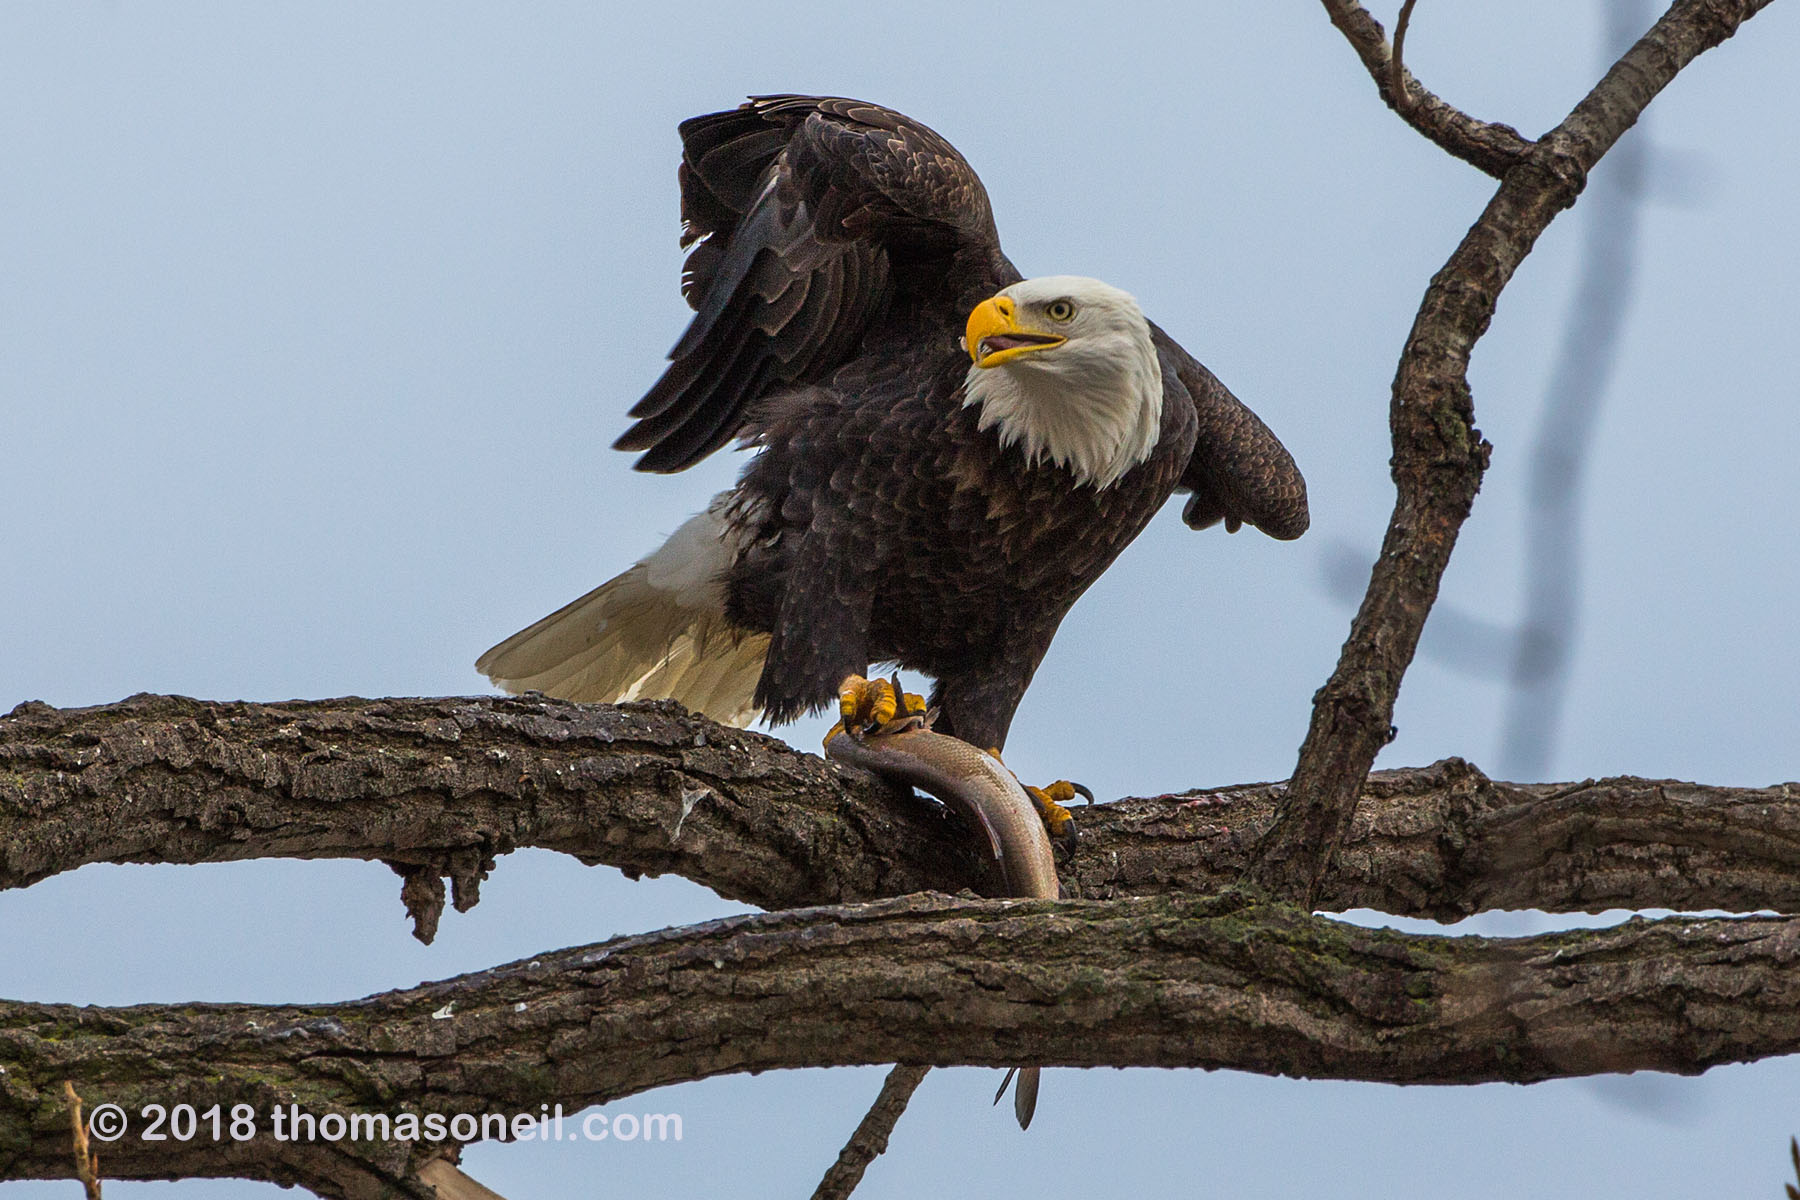 Bald eagle eating fish, 4 of 7 in sequence, Keokuk, Iowa.  Click for next photo.